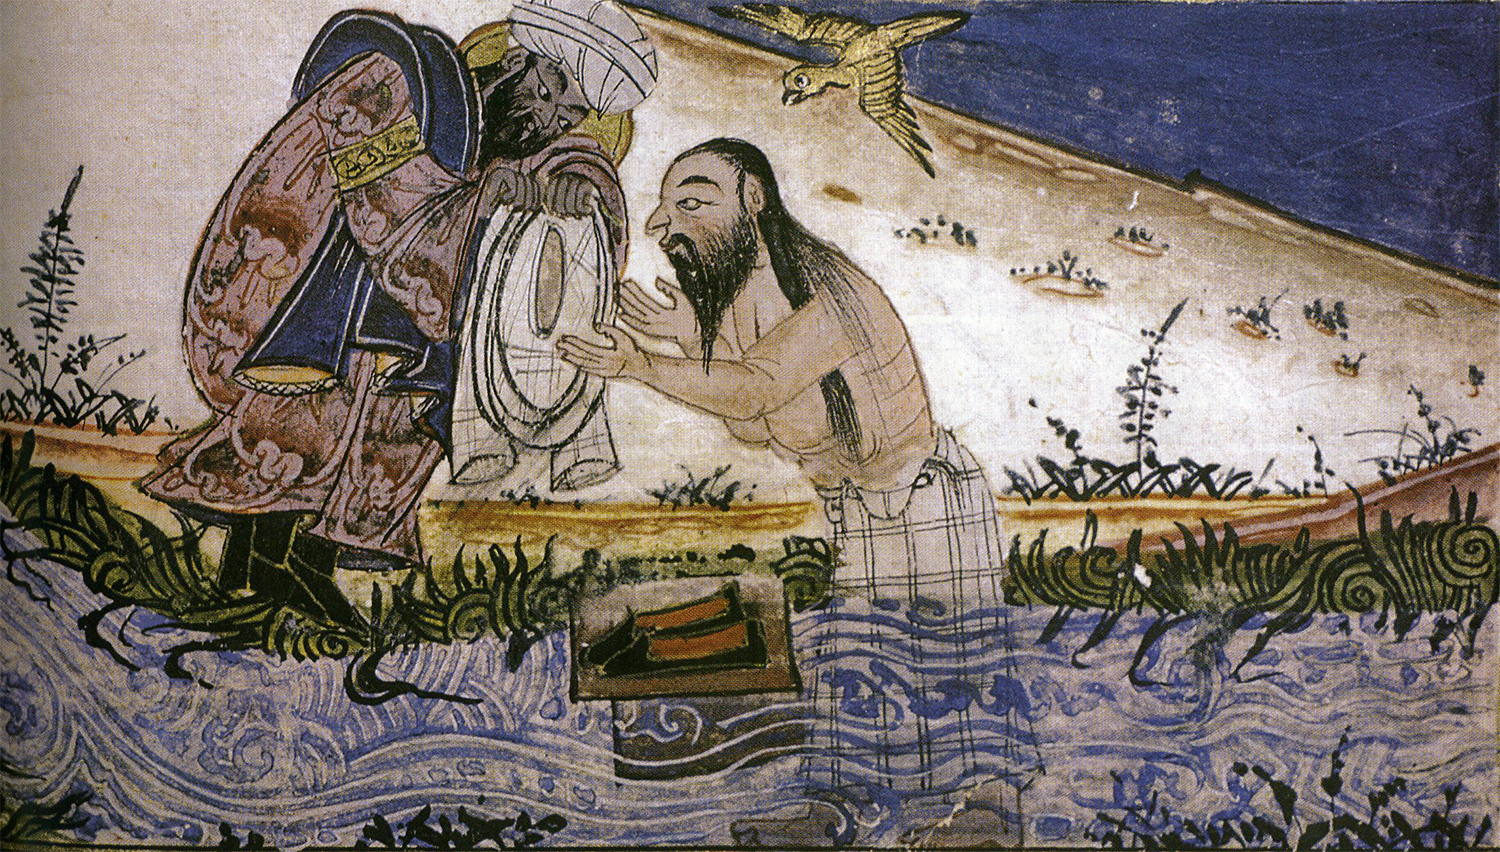 The baptism of Christ depicted in 'The Chronology of Ancient Nations' by Al-Biruni, Islamic school, 14th century.